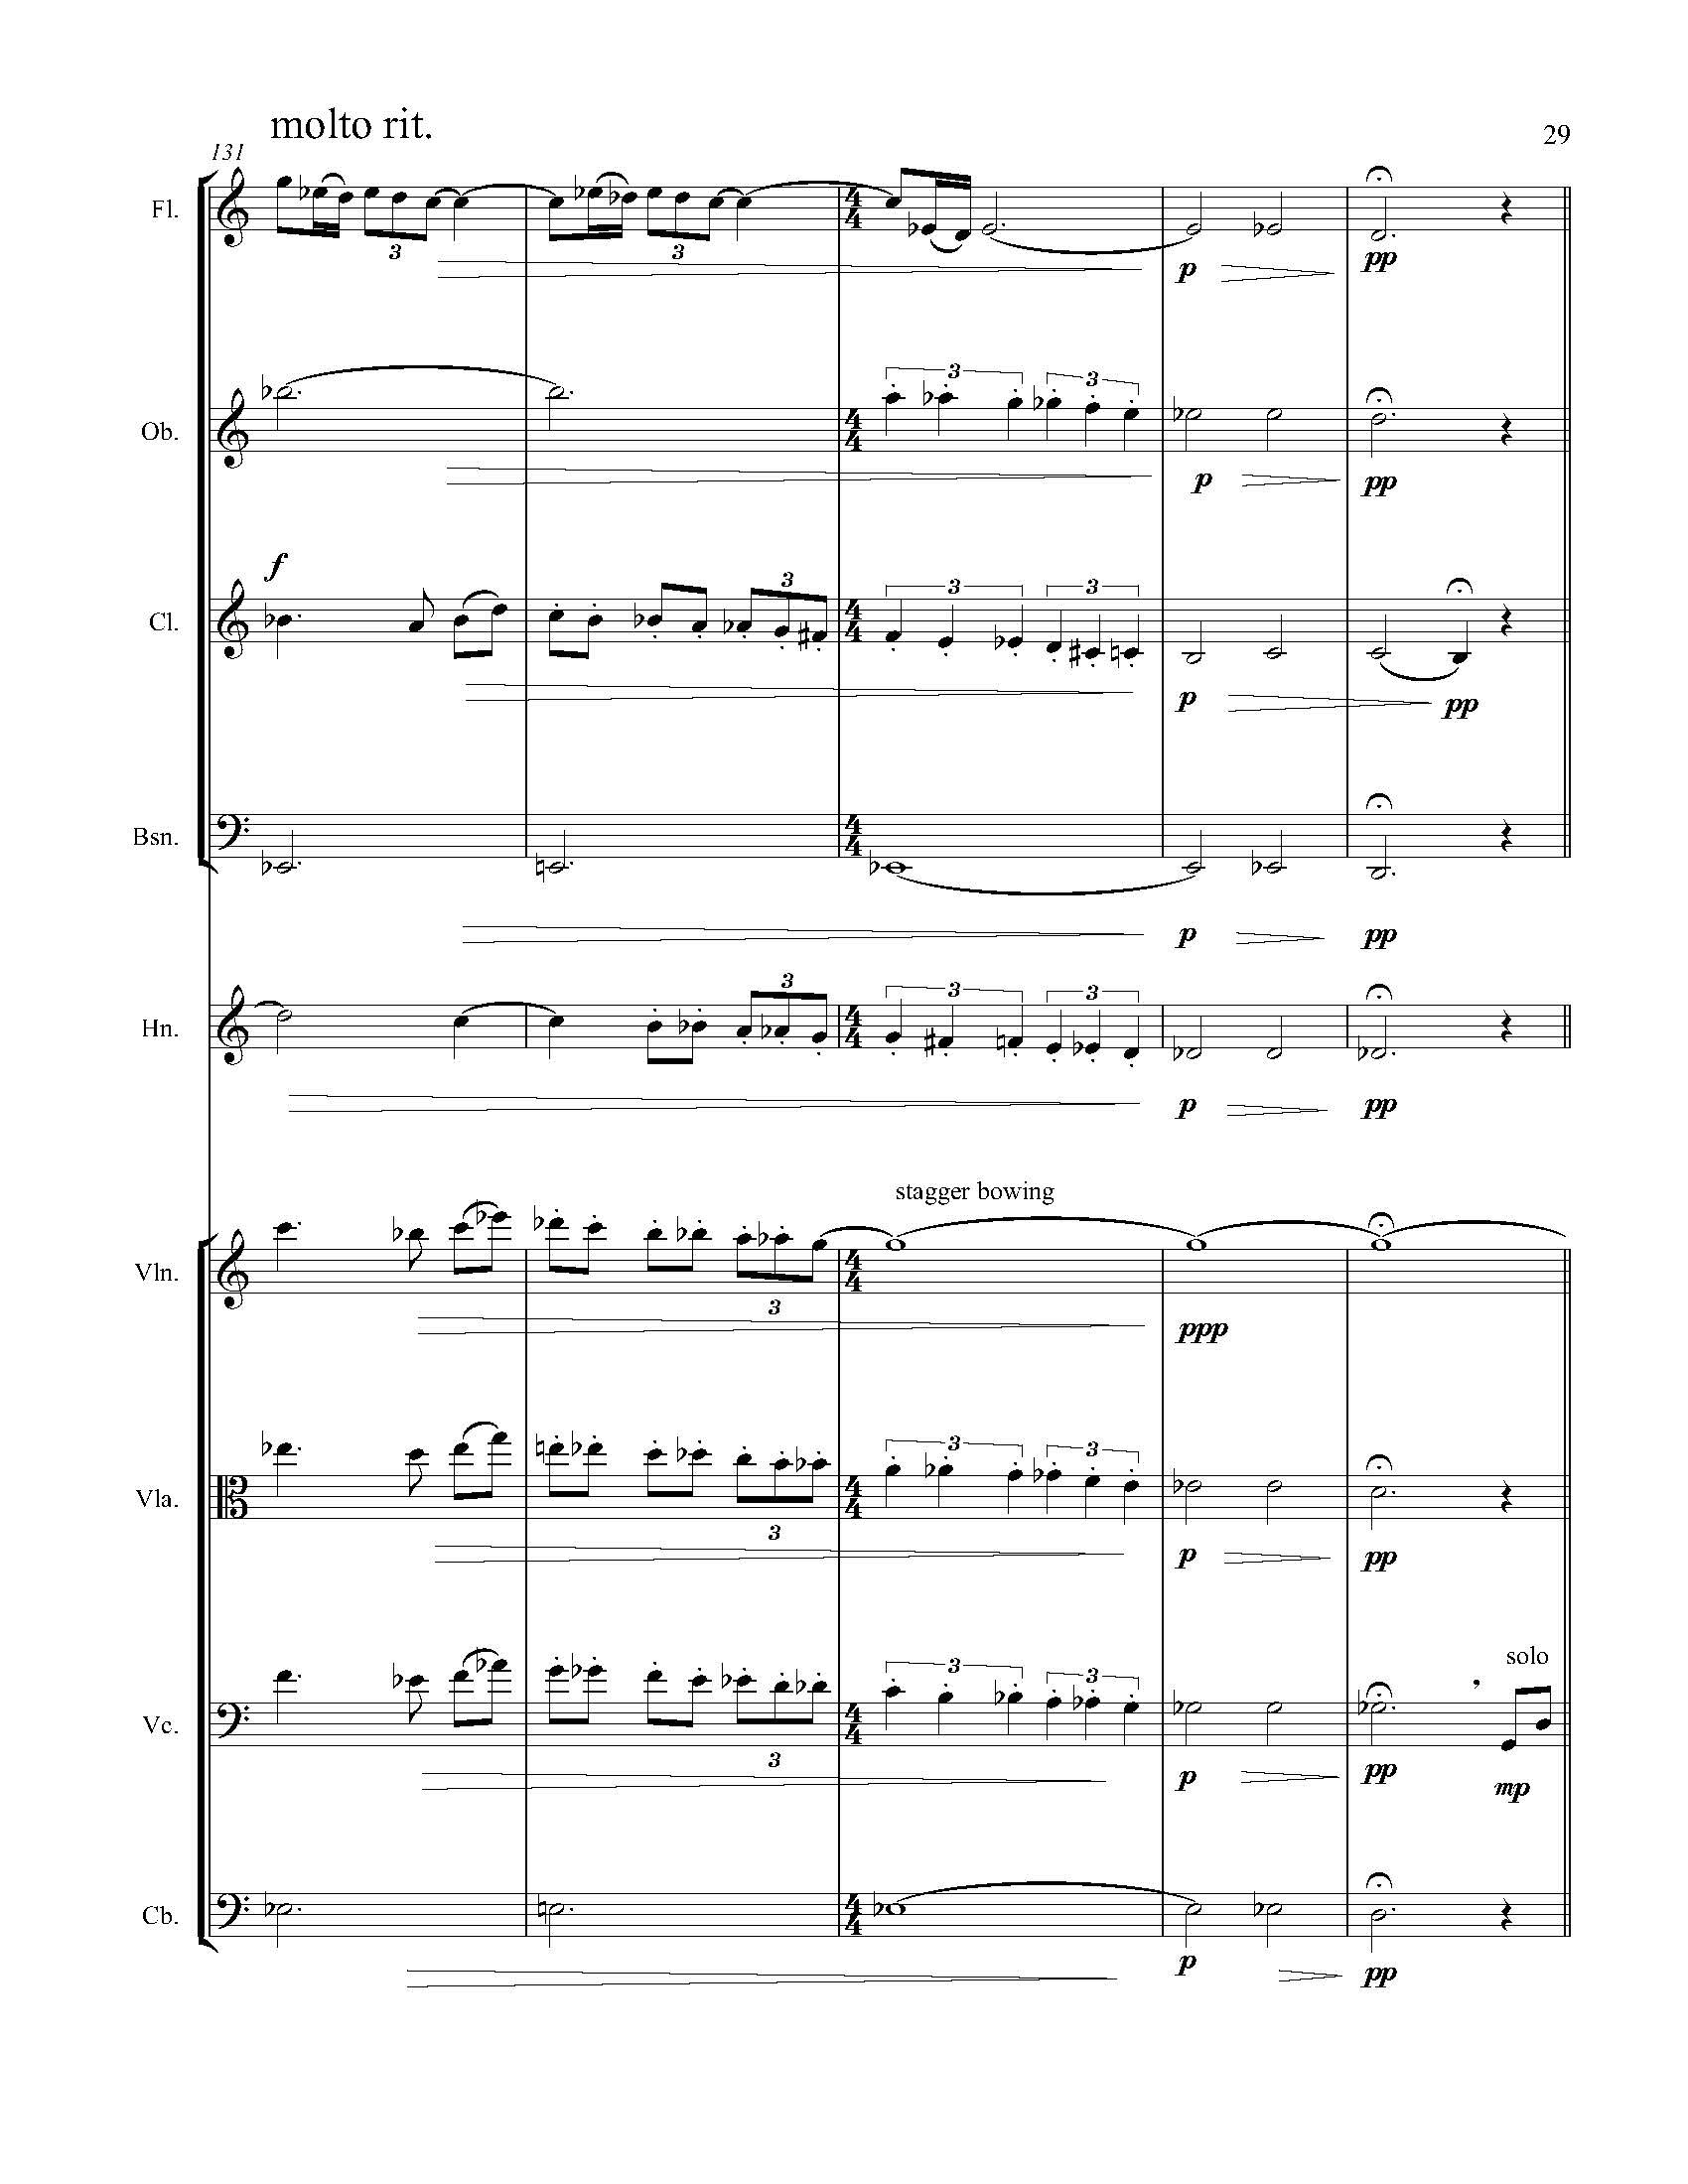 In Search of a Bird - Complete Score_Page_35.jpg